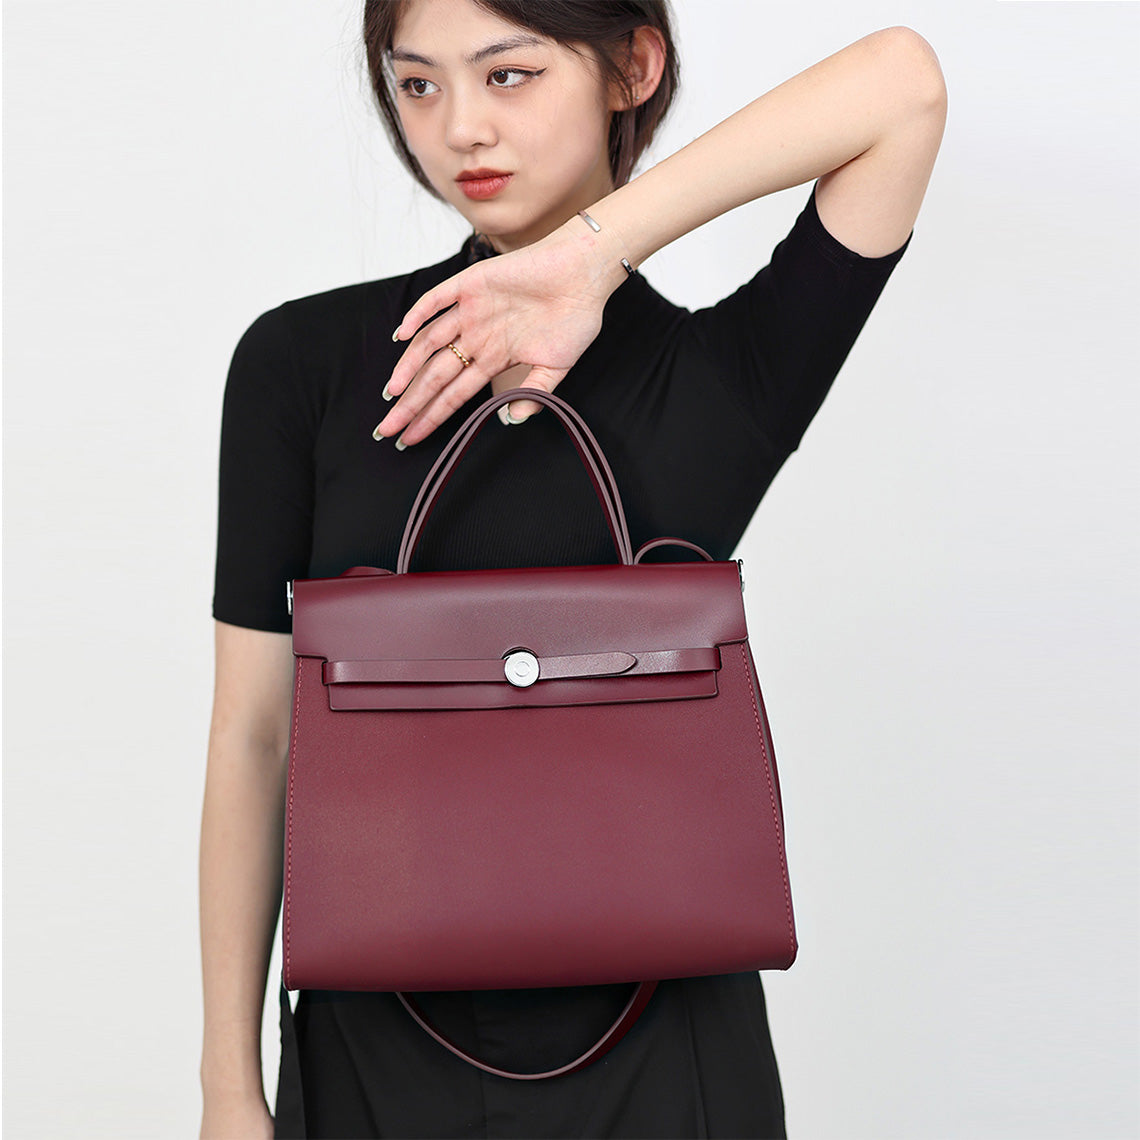 Leather Inspired Her Bag Zip Bag DIY Kit - Extra 20% Price Drop at Checkout